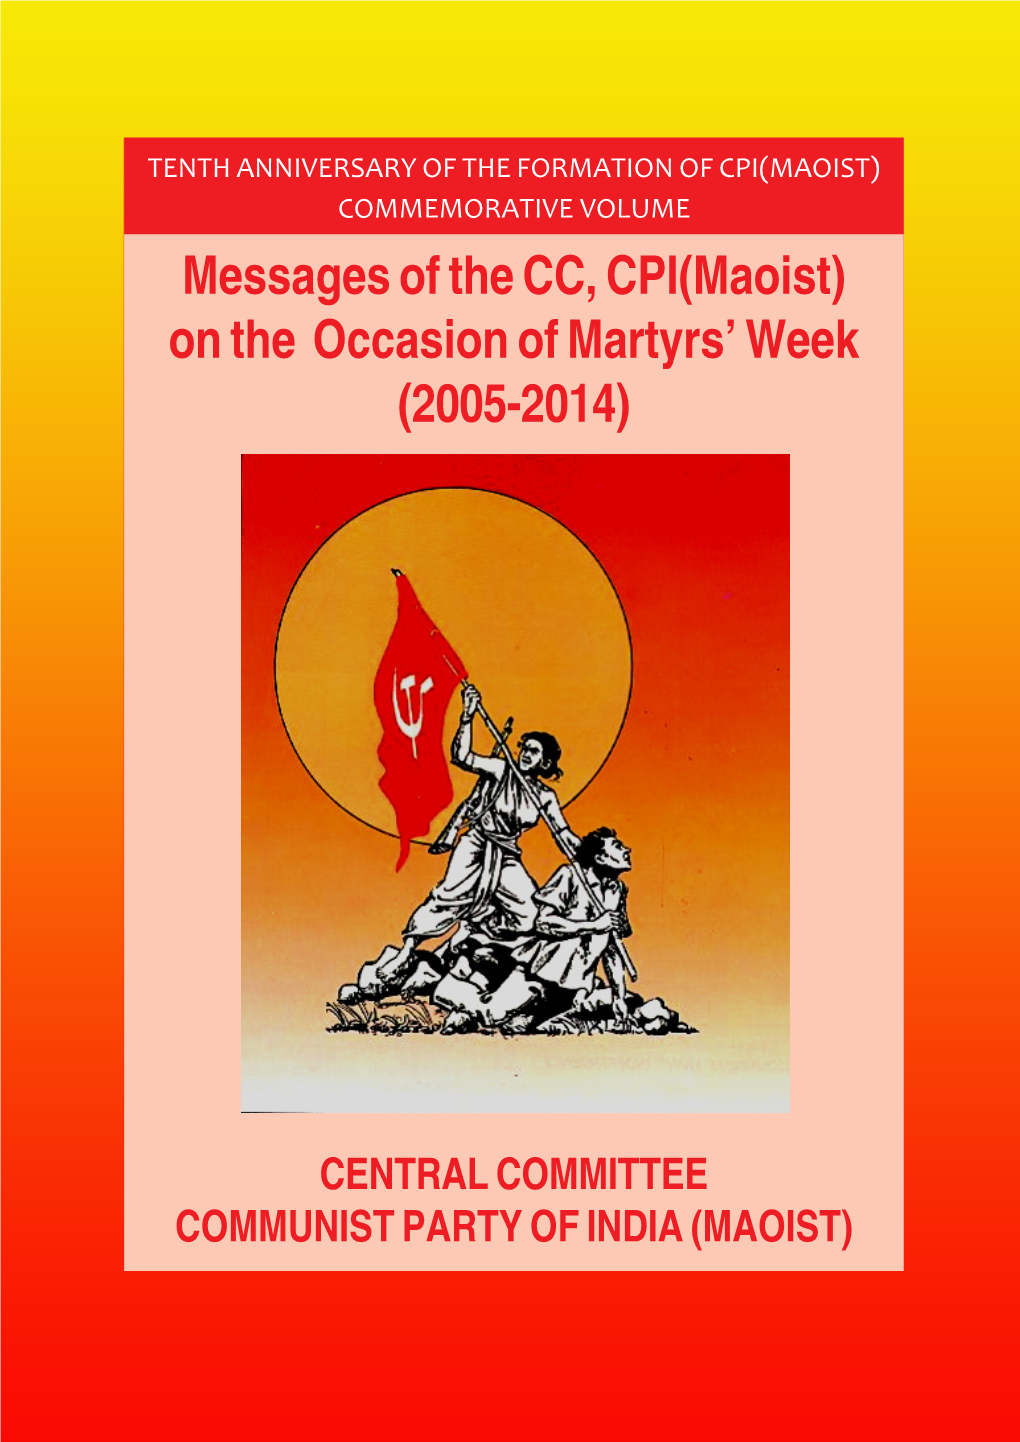 Messages of the CC, CPI(Maoist) on the Occasion of Martyrs' Week